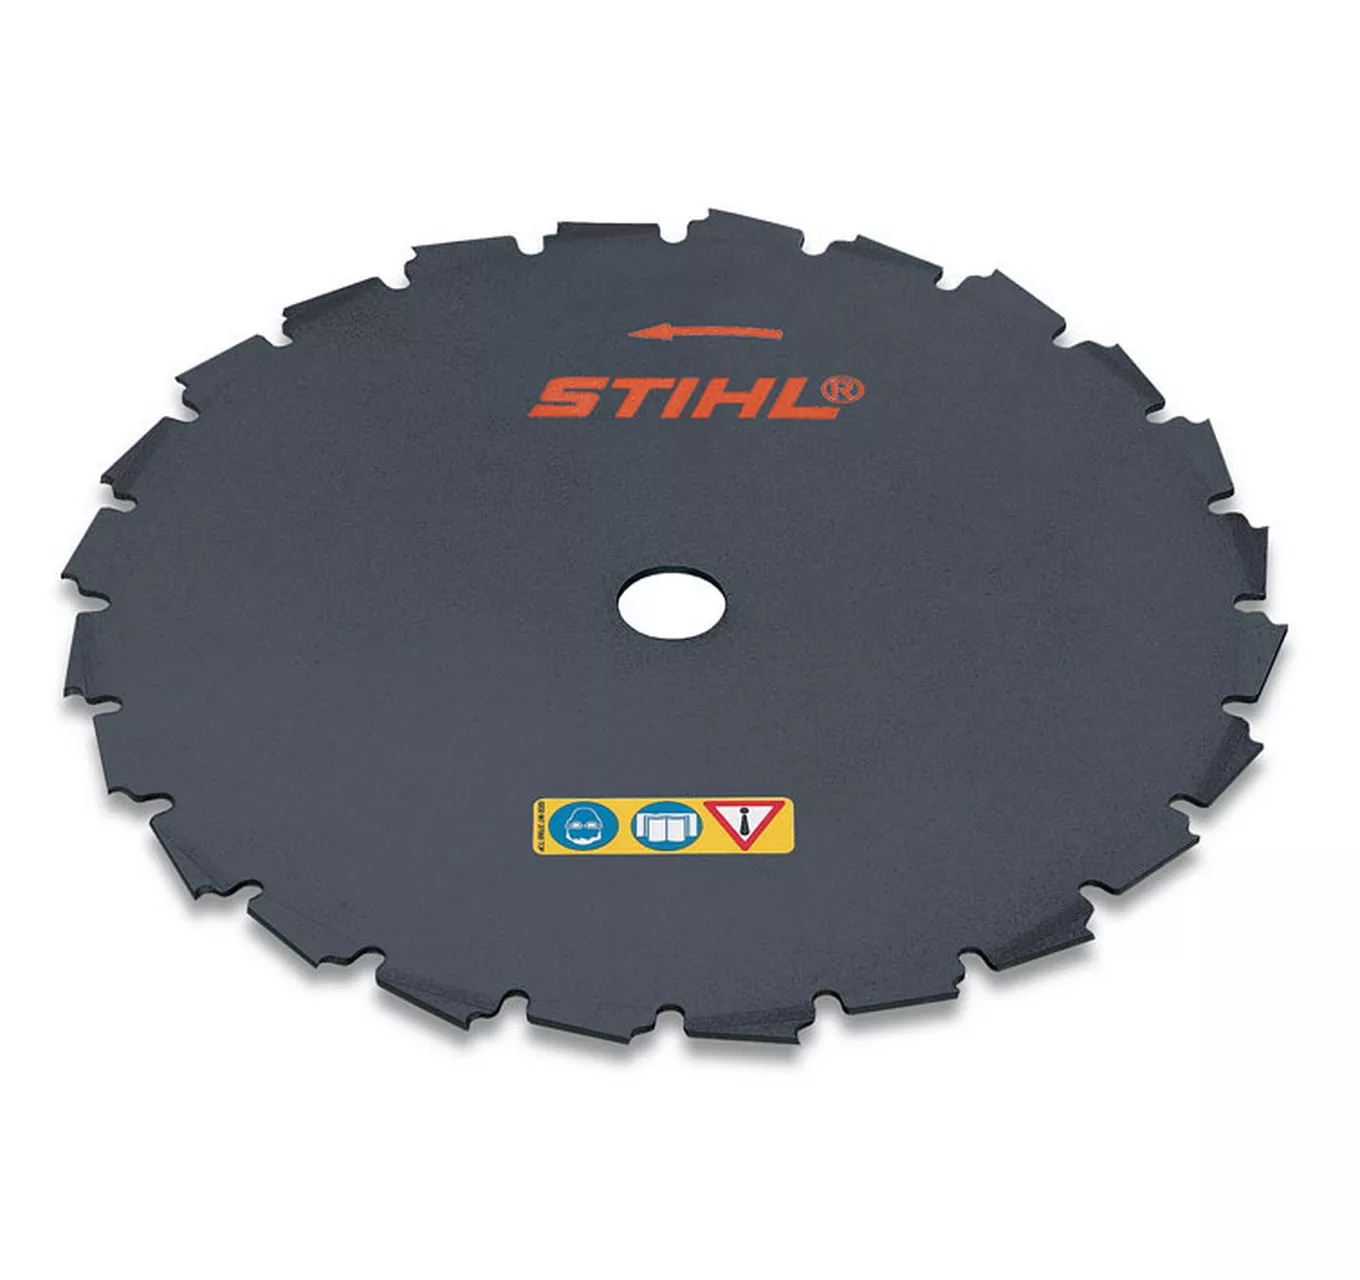 Chisel Saw Blade 225mm (24T)